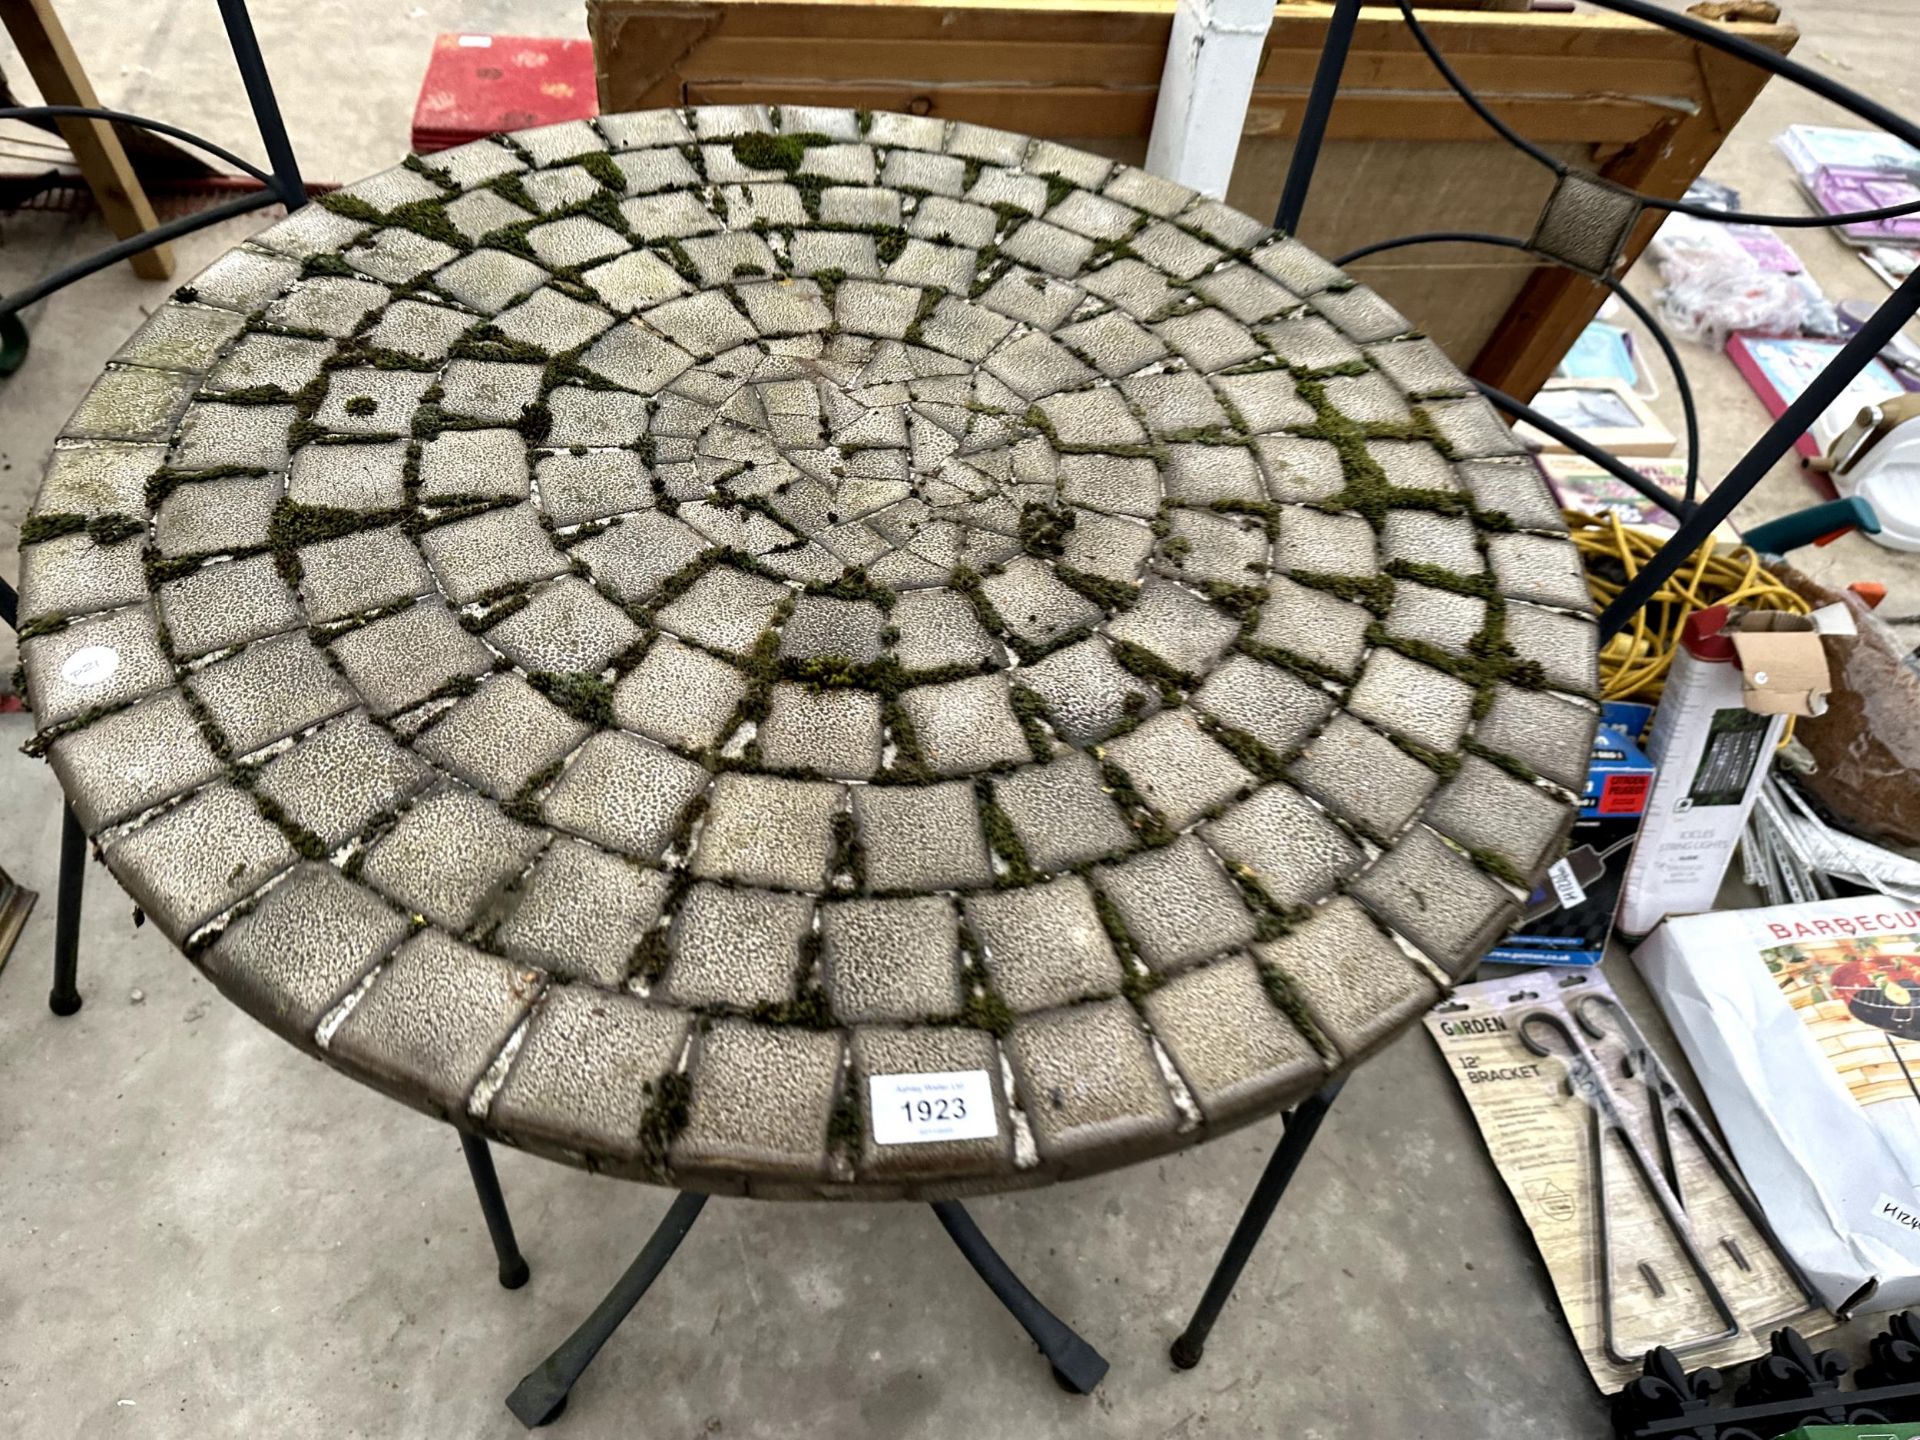 A BISTRO SET COMPRISING OF A ROUND TILE TOP TABLE AND TWO METAL CHAIRS - Image 2 of 3